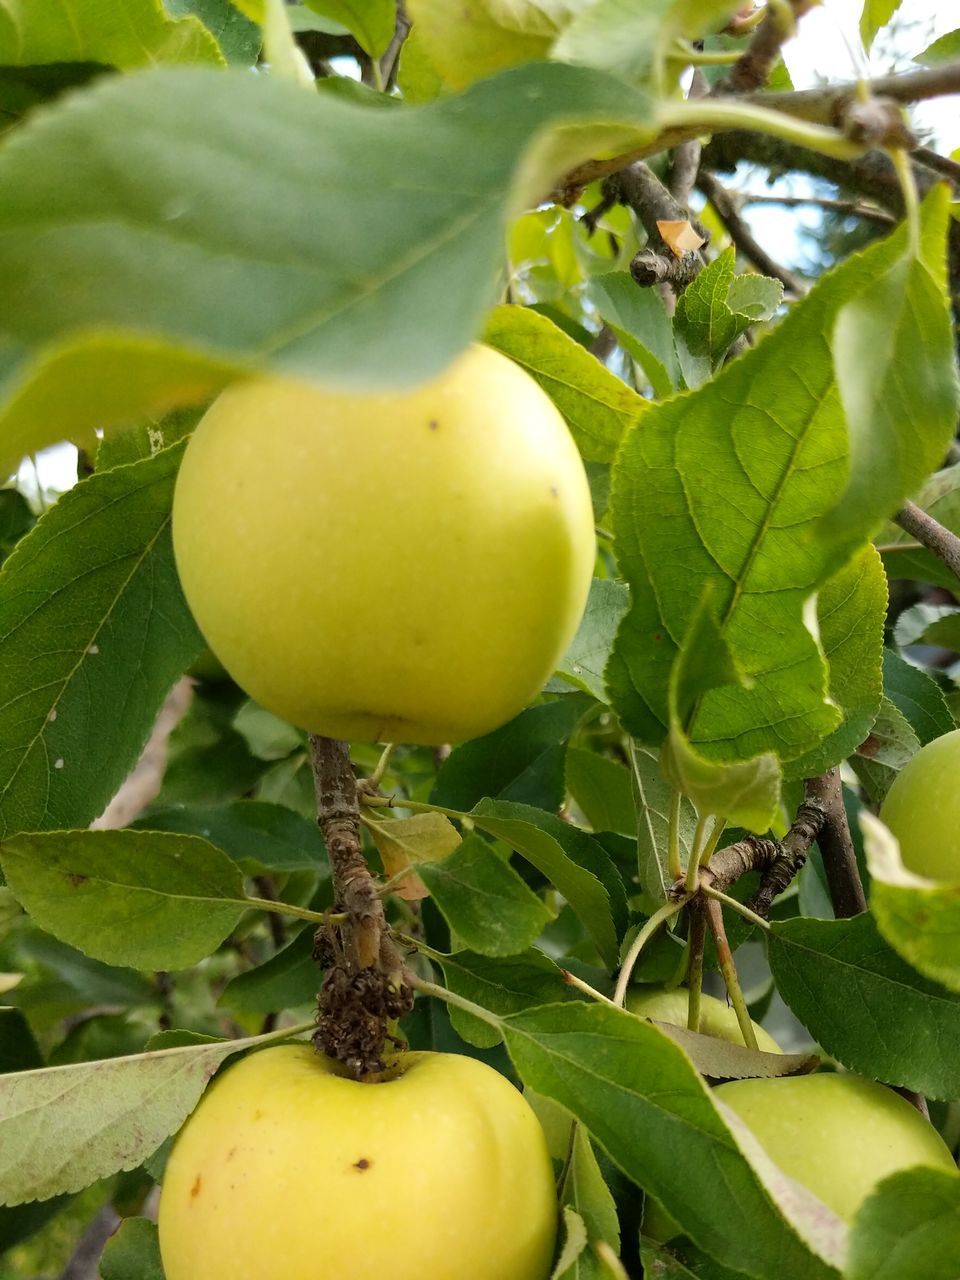 CLOSE-UP OF APPLE GROWING ON PLANT